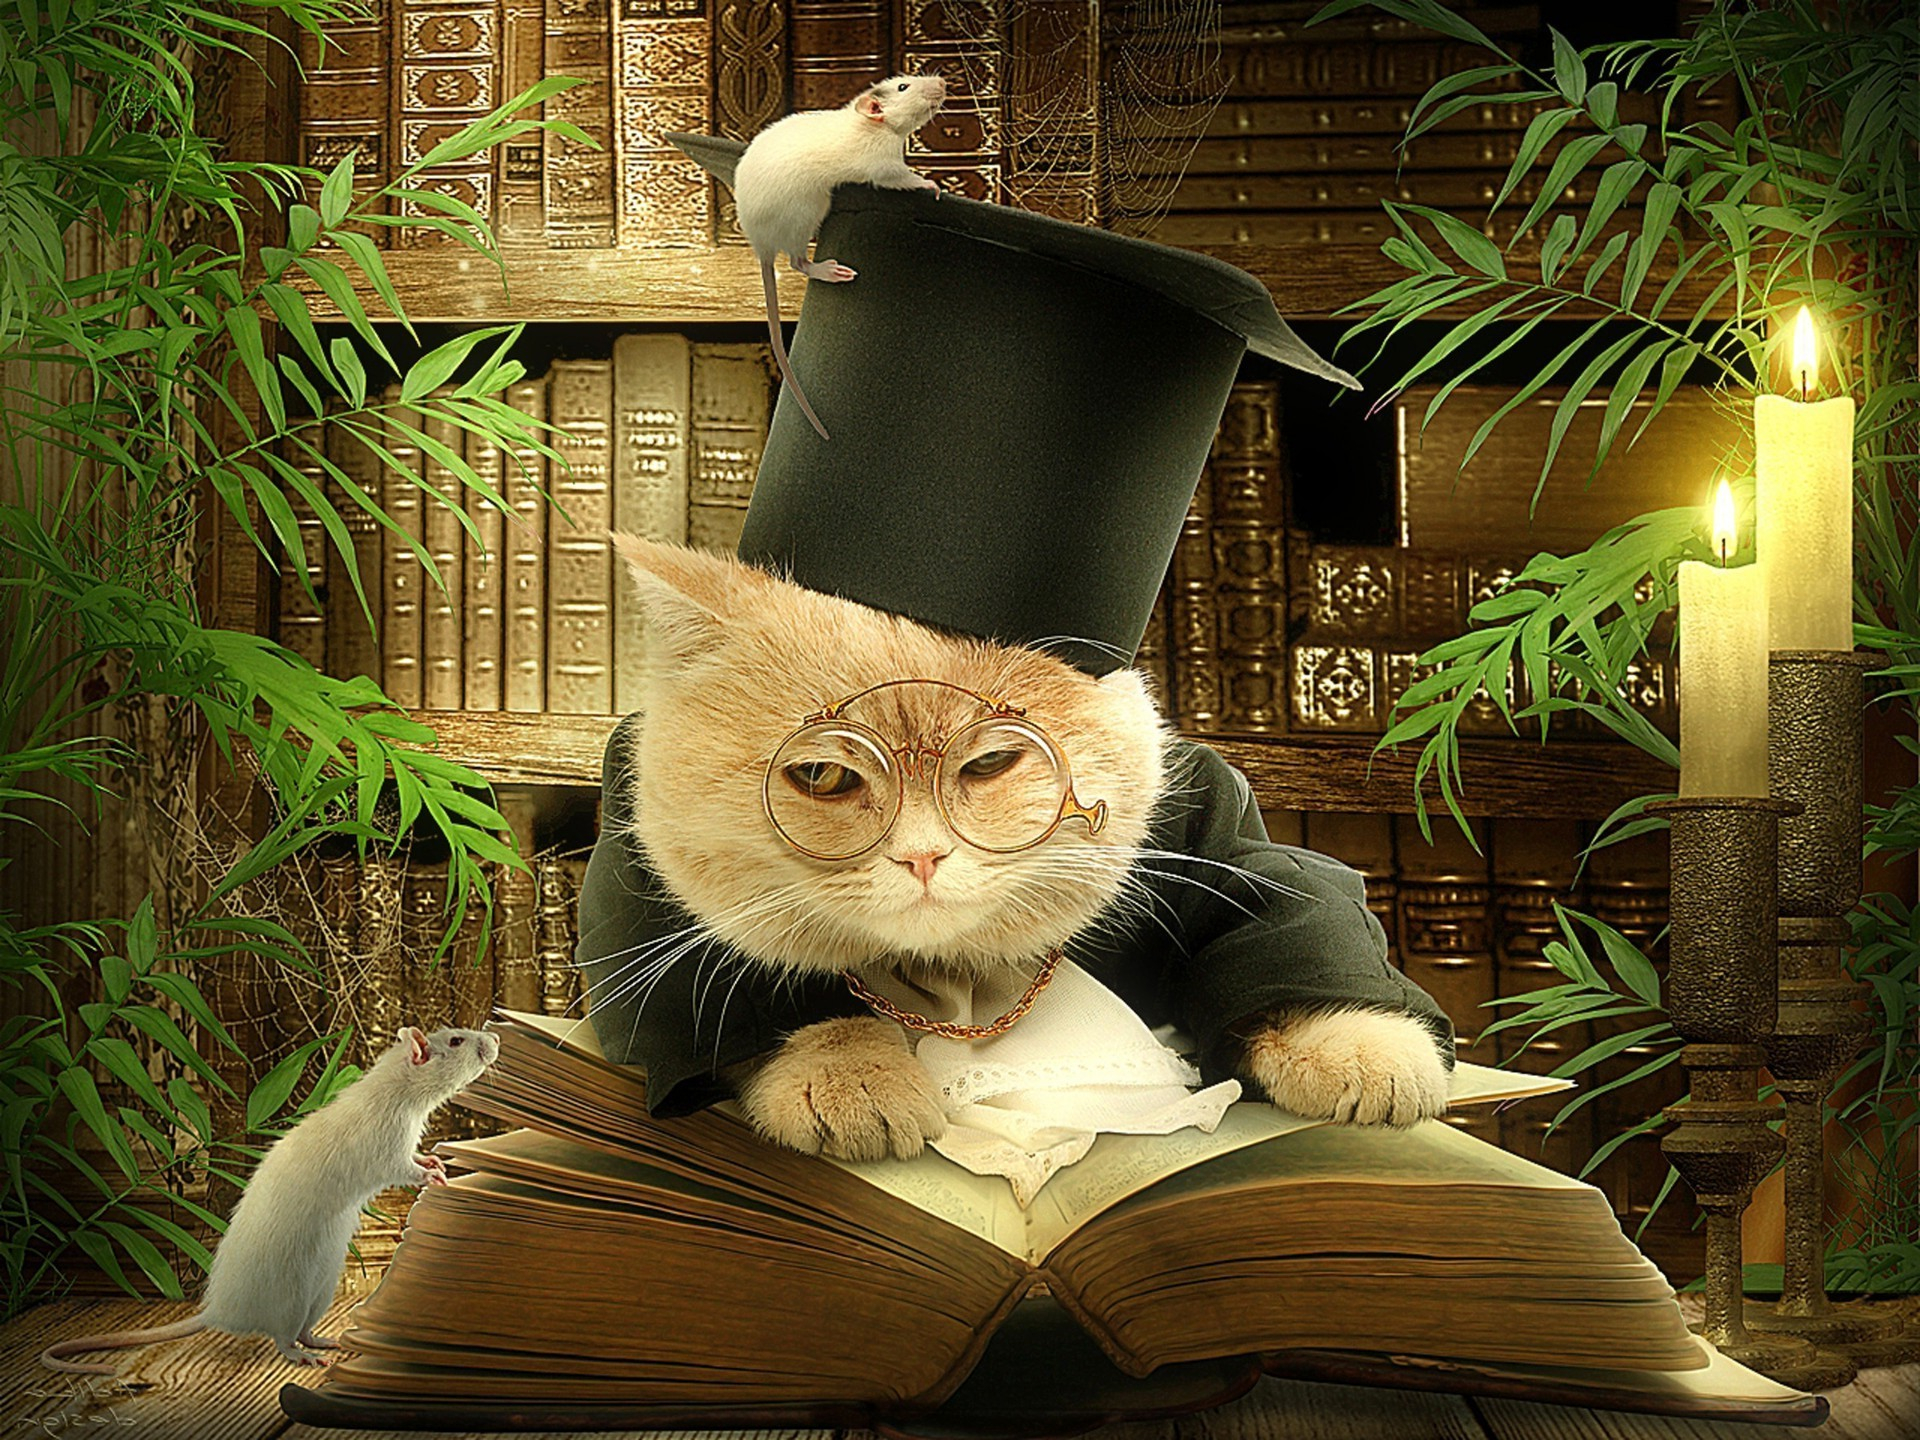 1920x1440 A red-haired cat with glasses and a black headdress, with a rat sitting on the background of shelves with books, behind an open book wallpaper